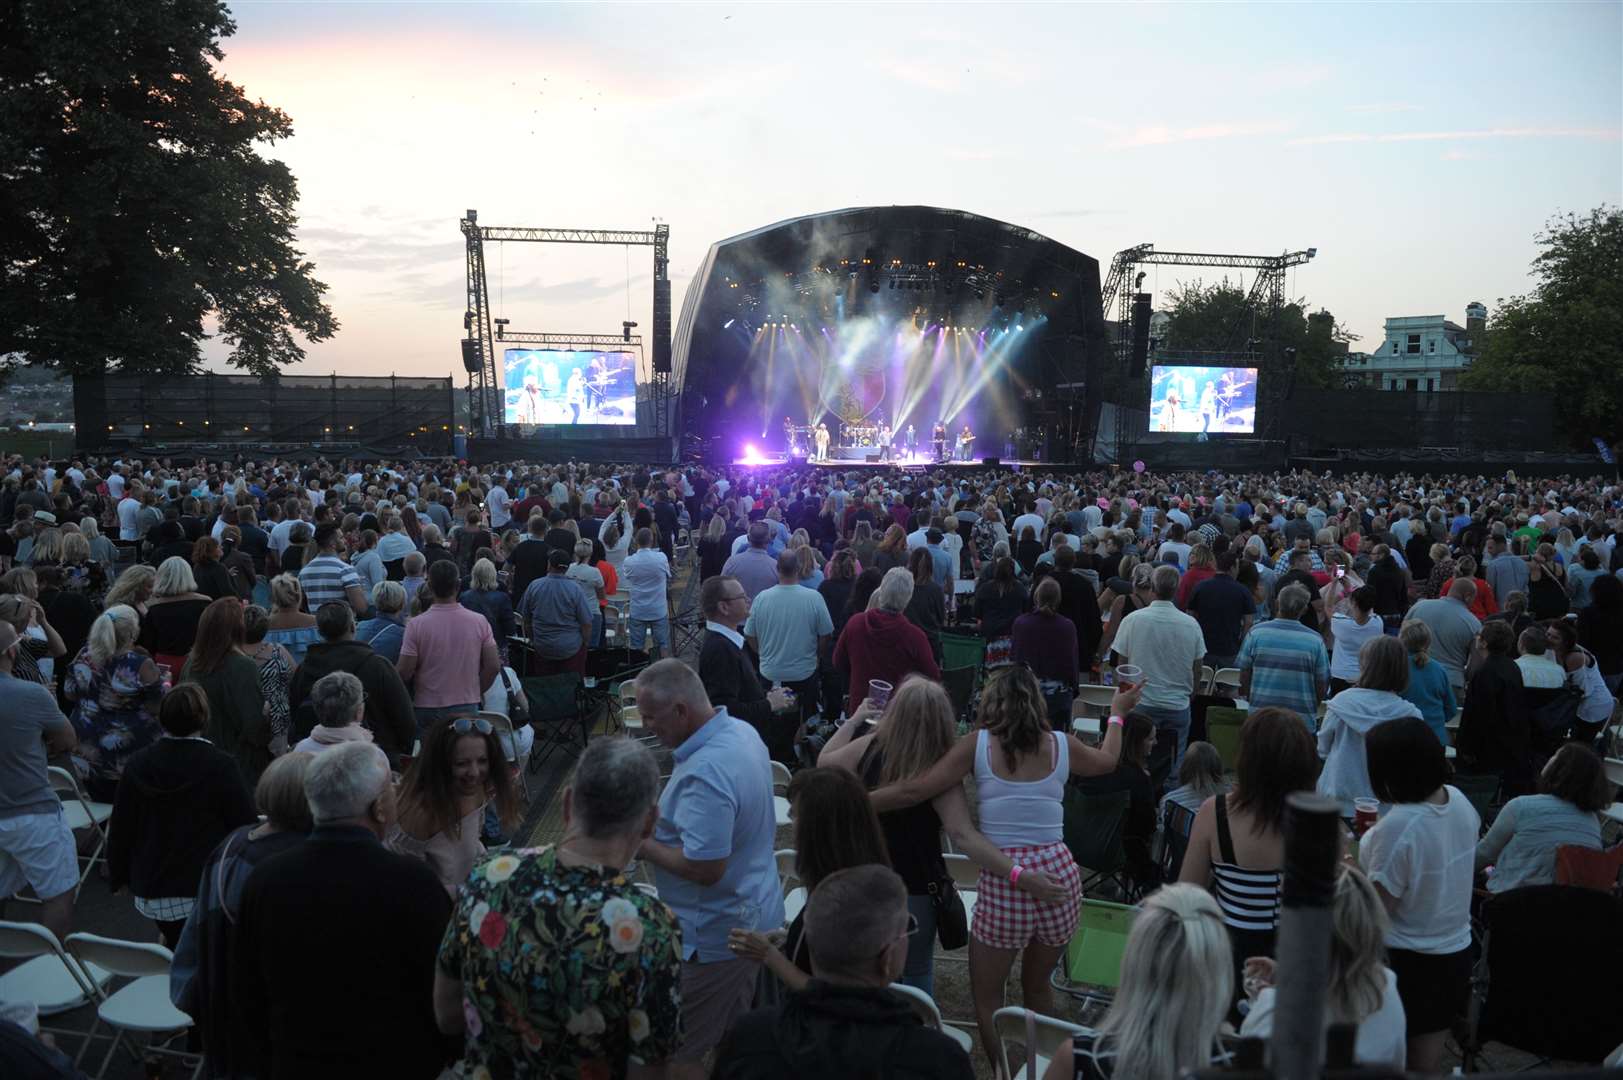 The crowd enjoying UB40 at Rochester Castle back in 2018. Picture: Steve Crispe